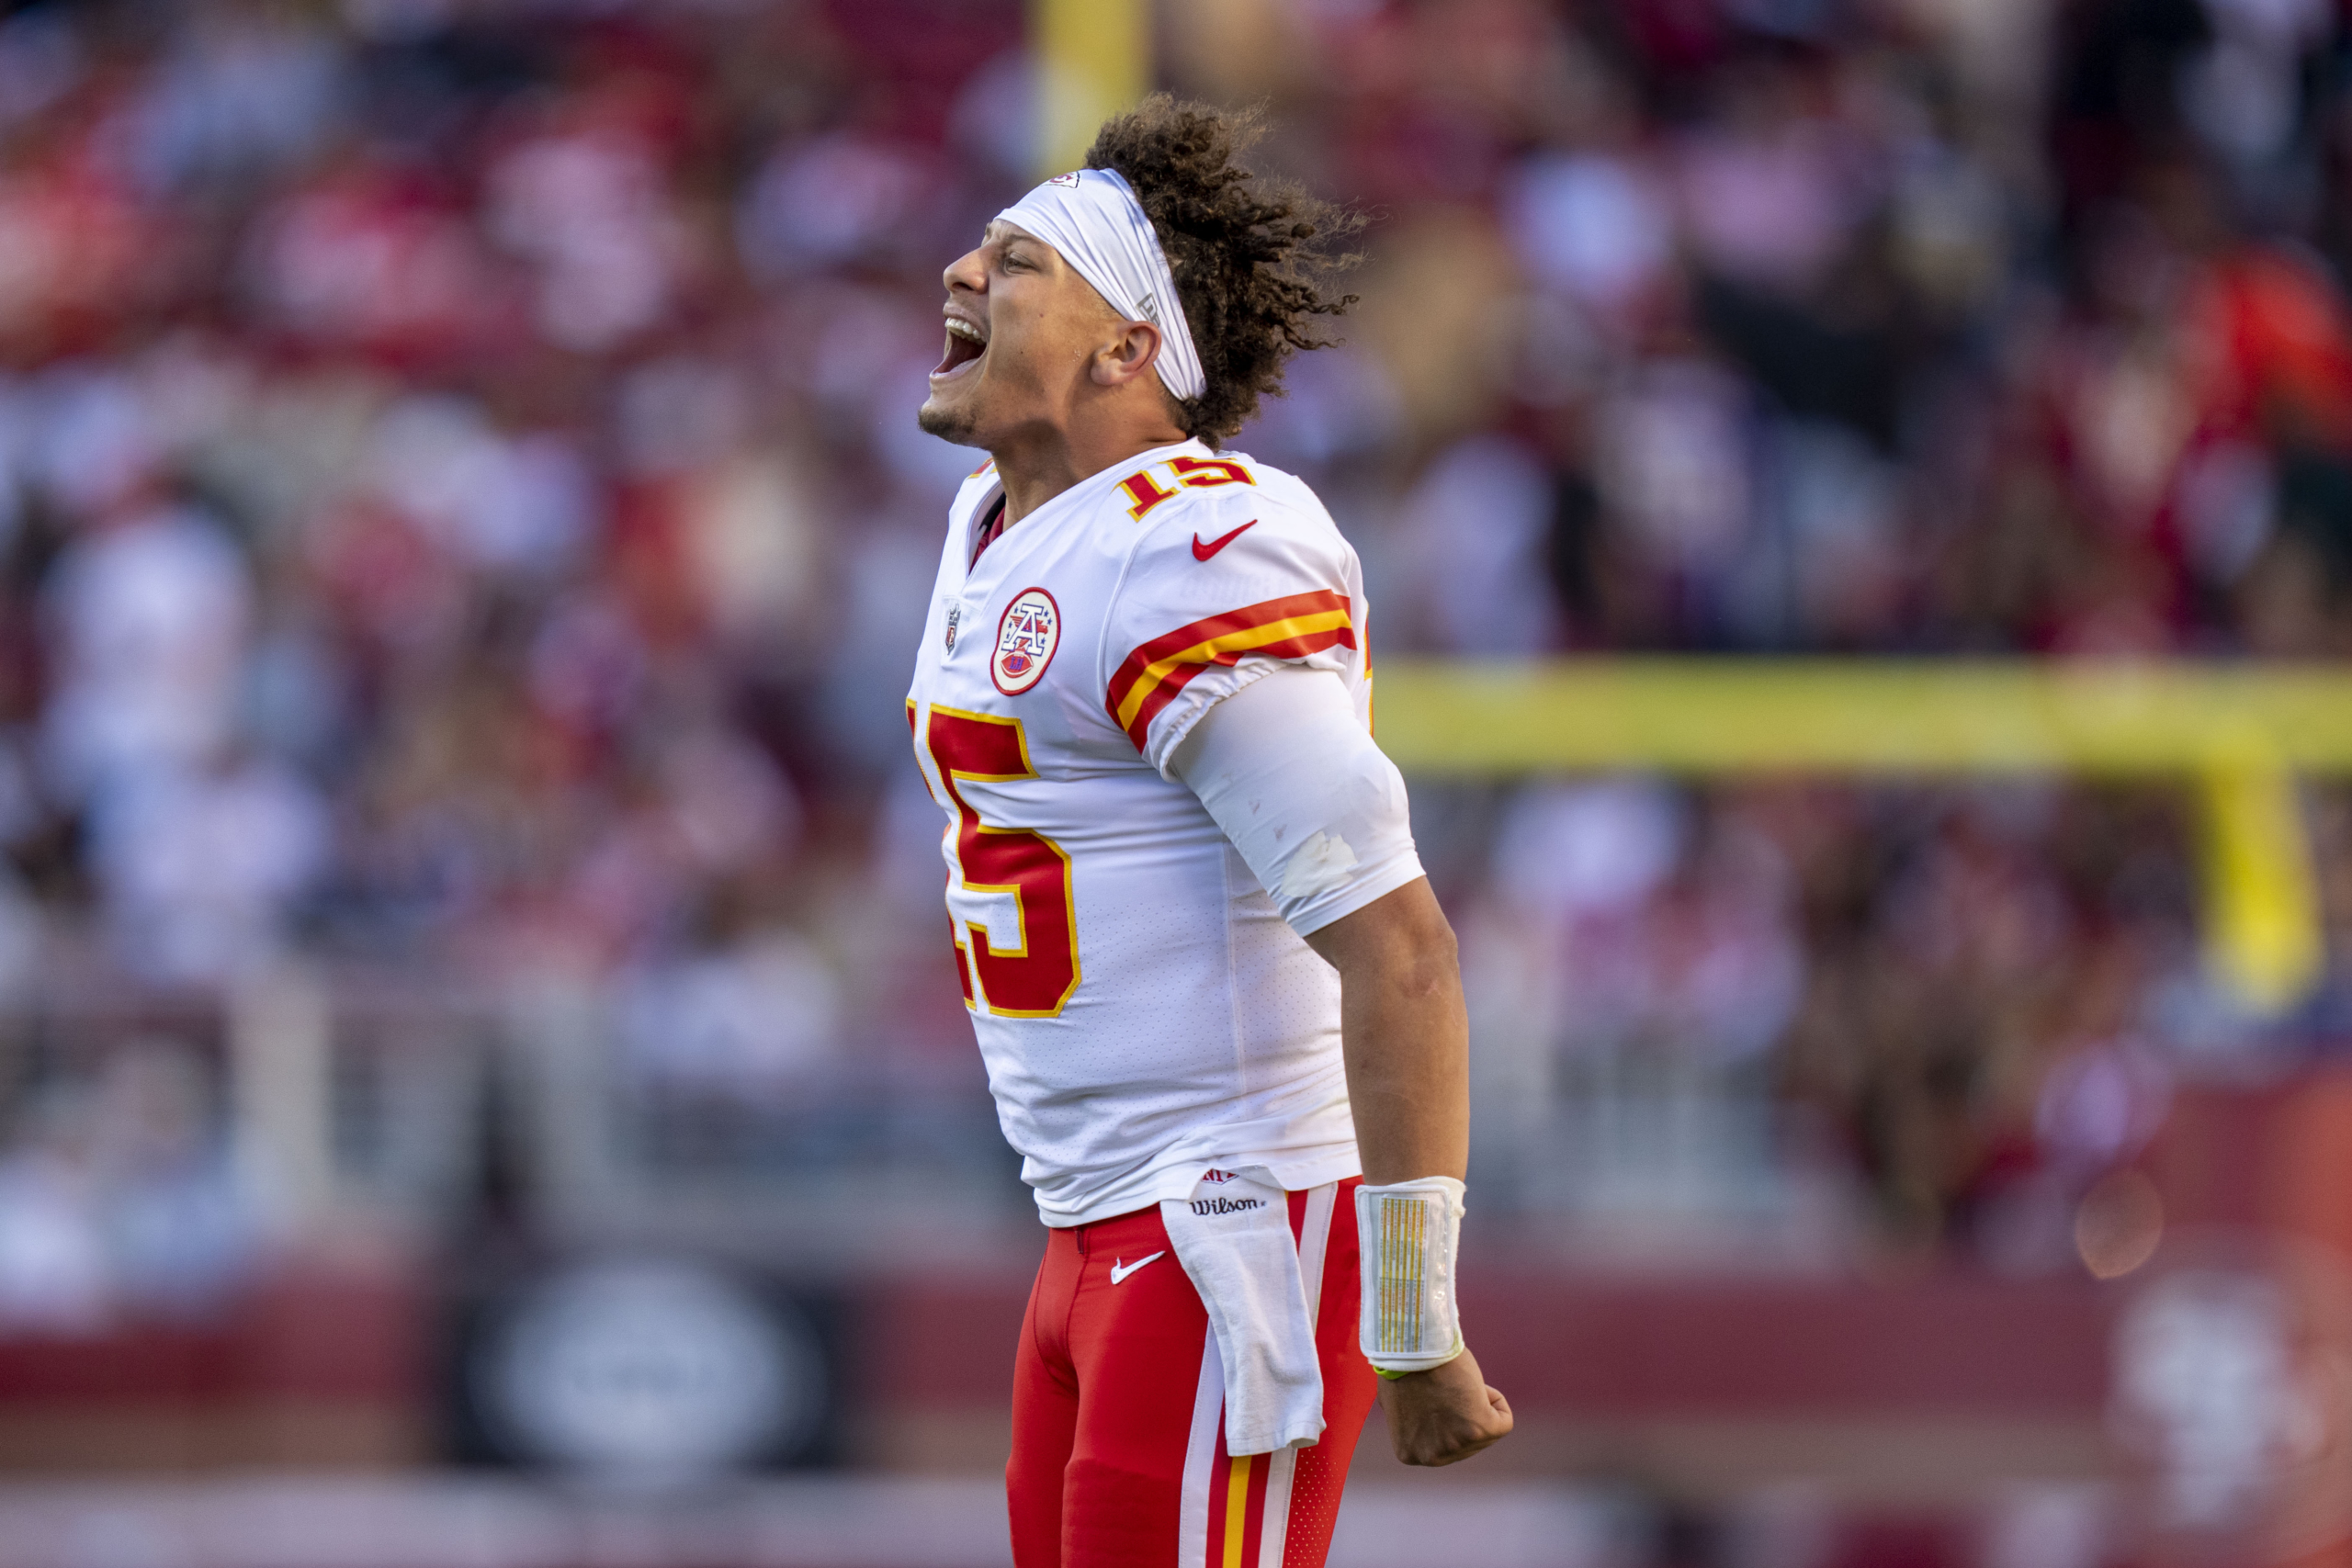 Chiefs to 'assess' Patrick Mahomes contract after Joe Burrow deal